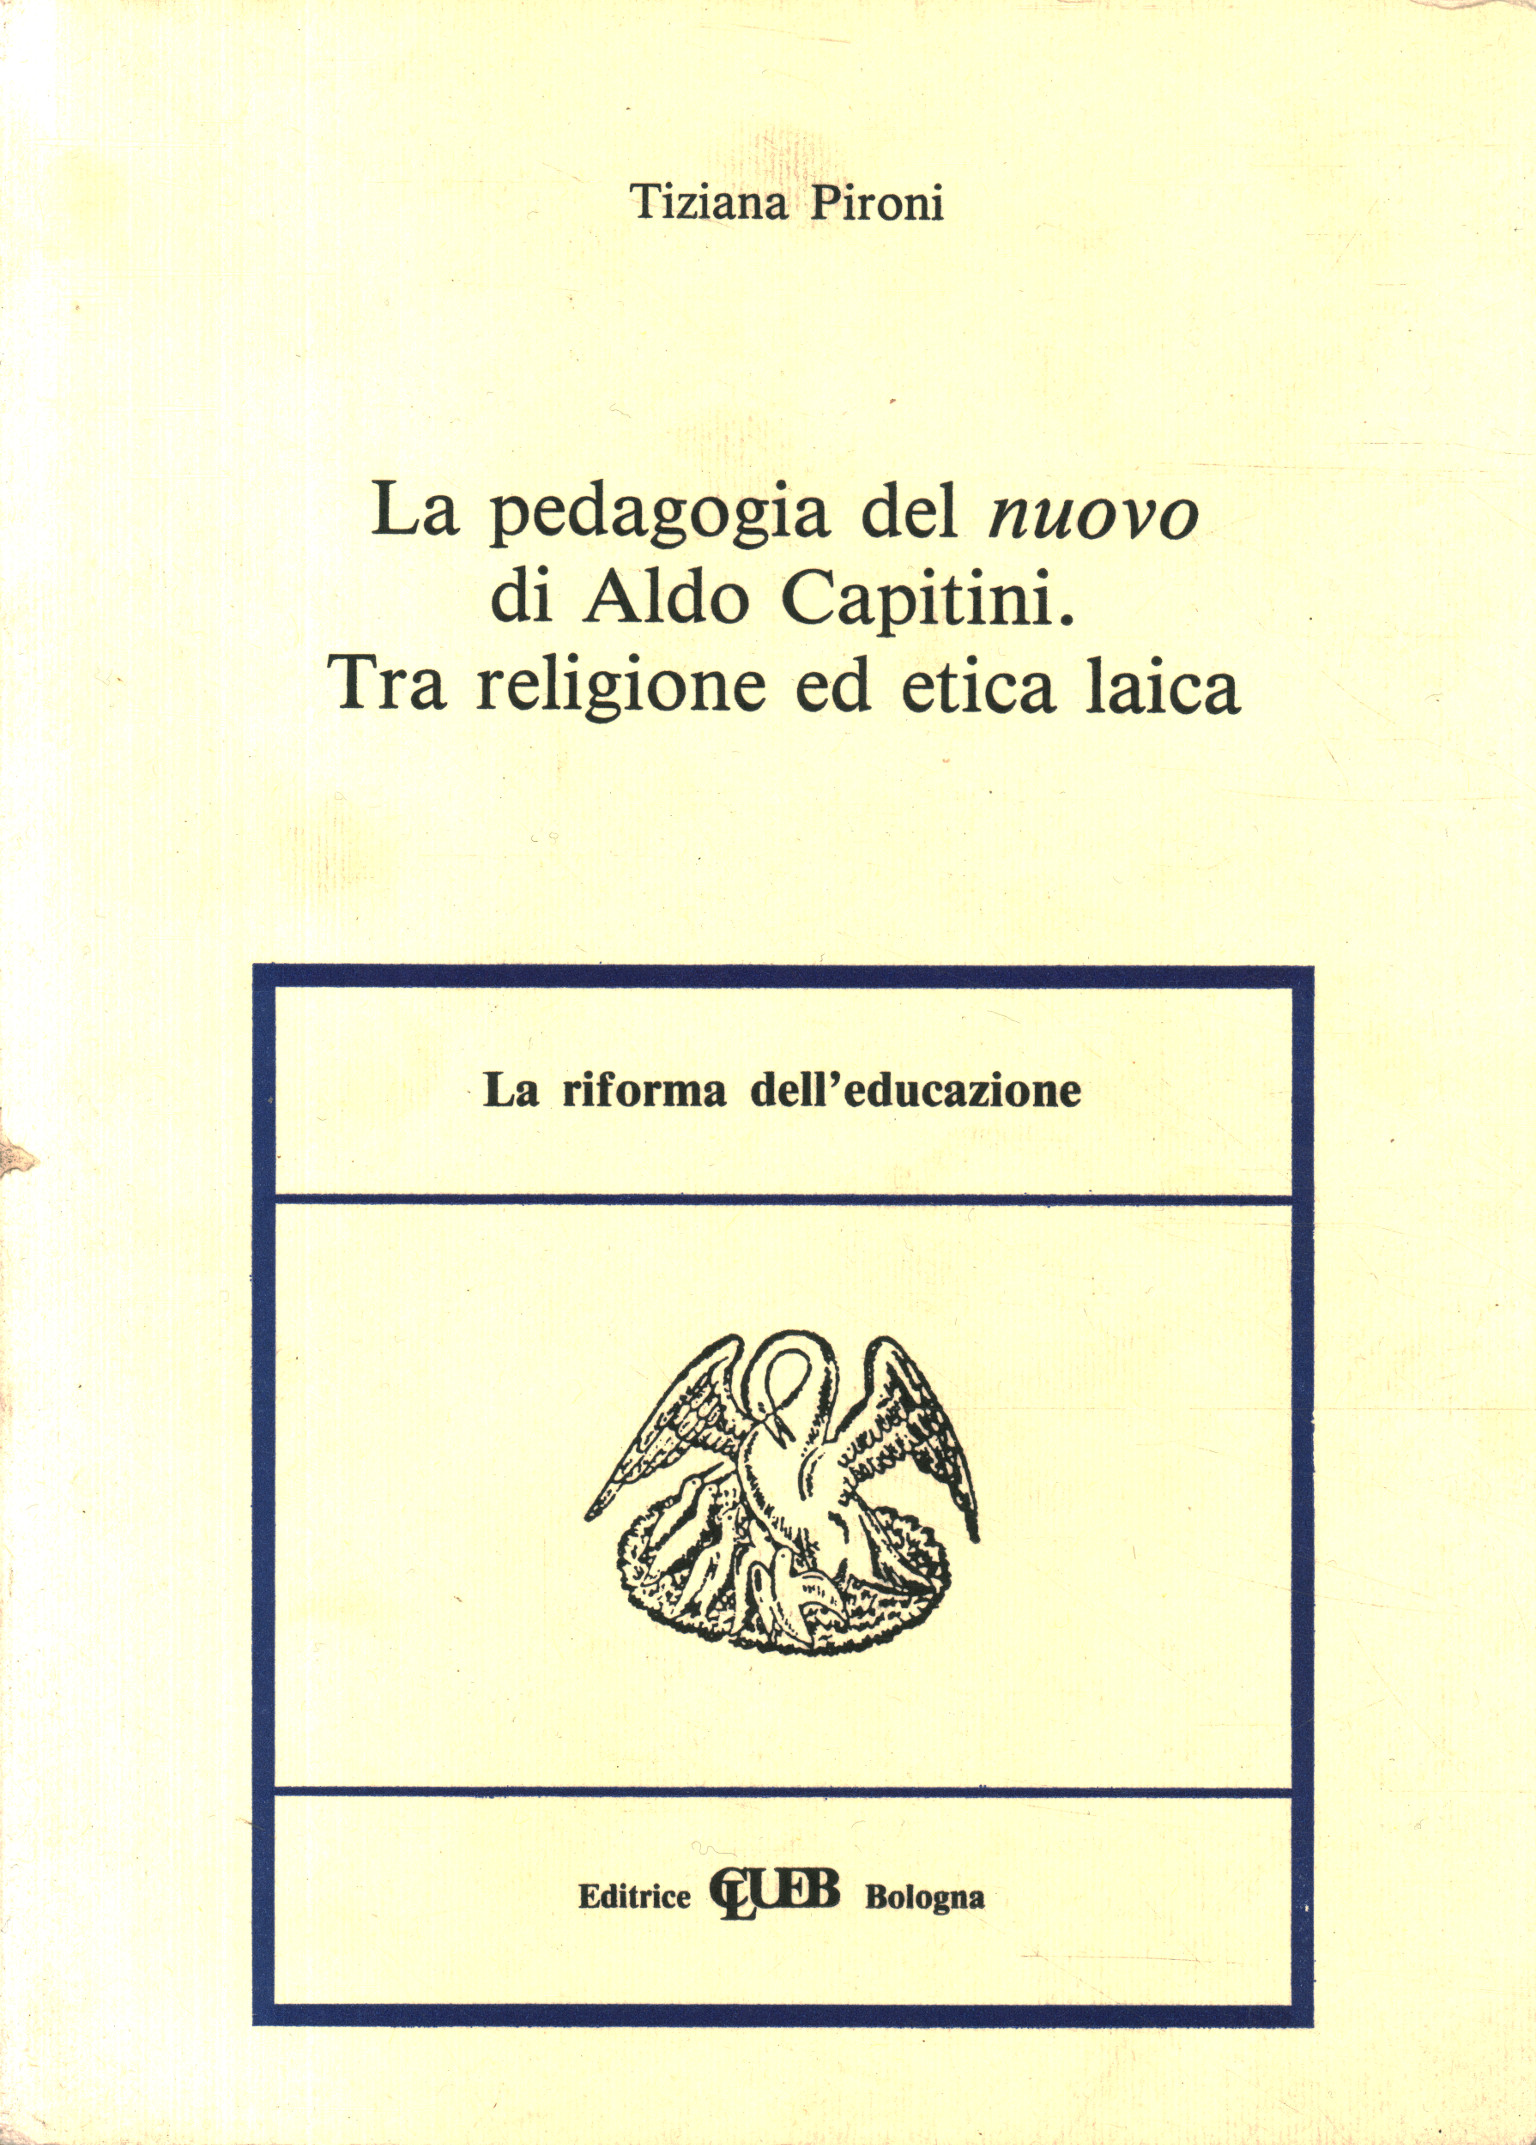 The pedagogy of the new by Aldo Capitin